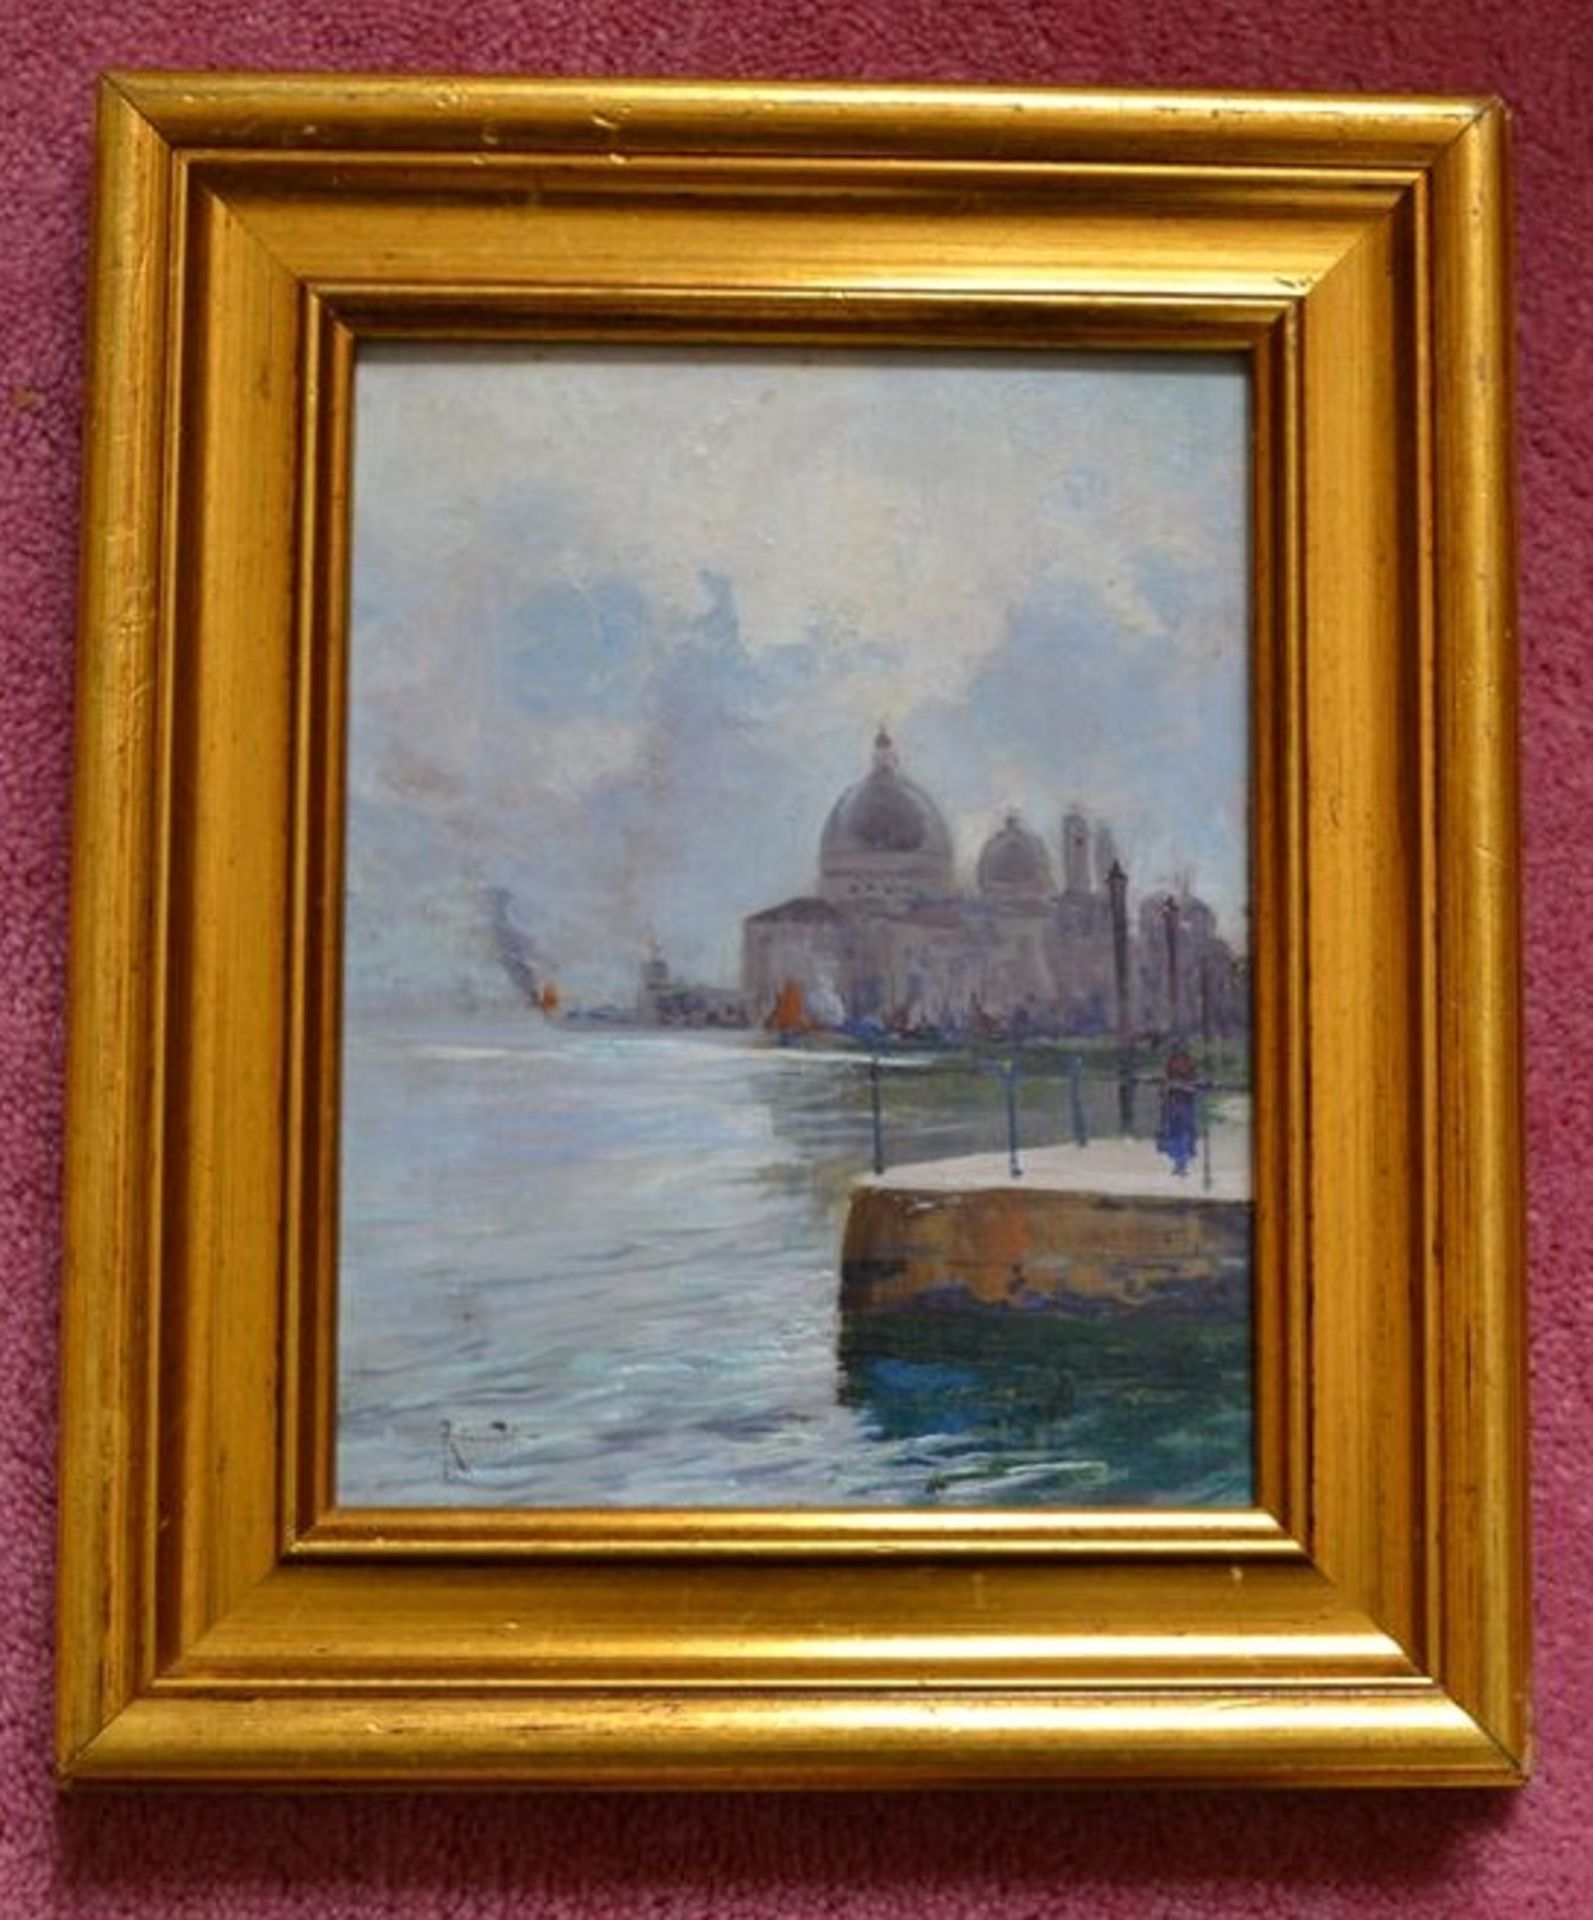 1 x Original Oil Painting By F. Rinaldi, Depicting A Venetian Scene - 19th Century - From A Grade II